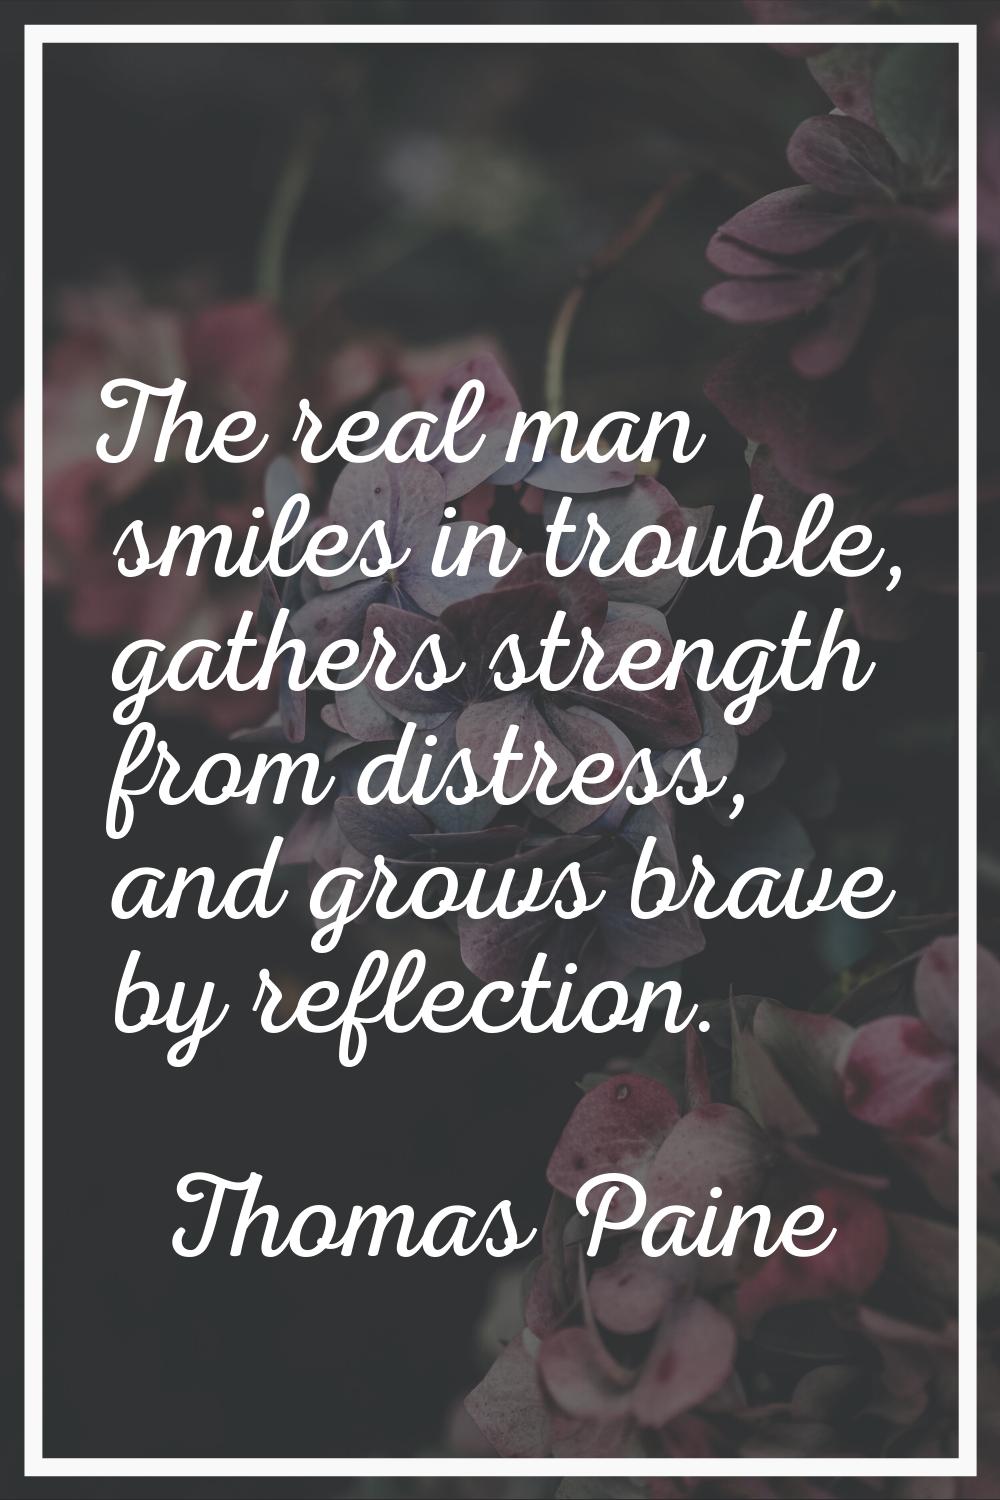 The real man smiles in trouble, gathers strength from distress, and grows brave by reflection.